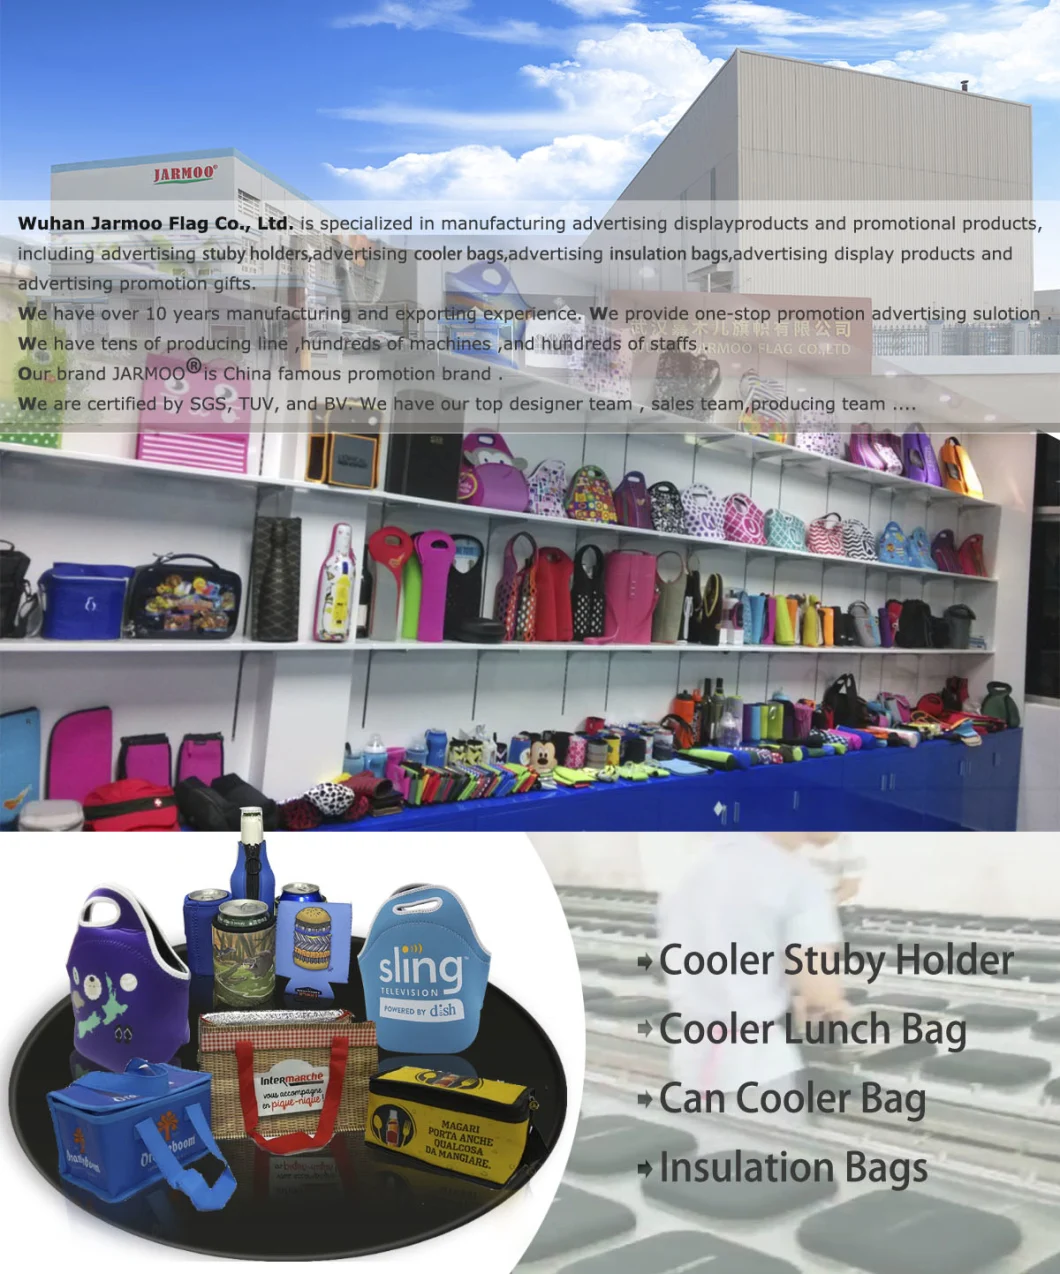 Custom Print Portable Non Woven Promotional Bag Insulated Lunch Cooler Bag